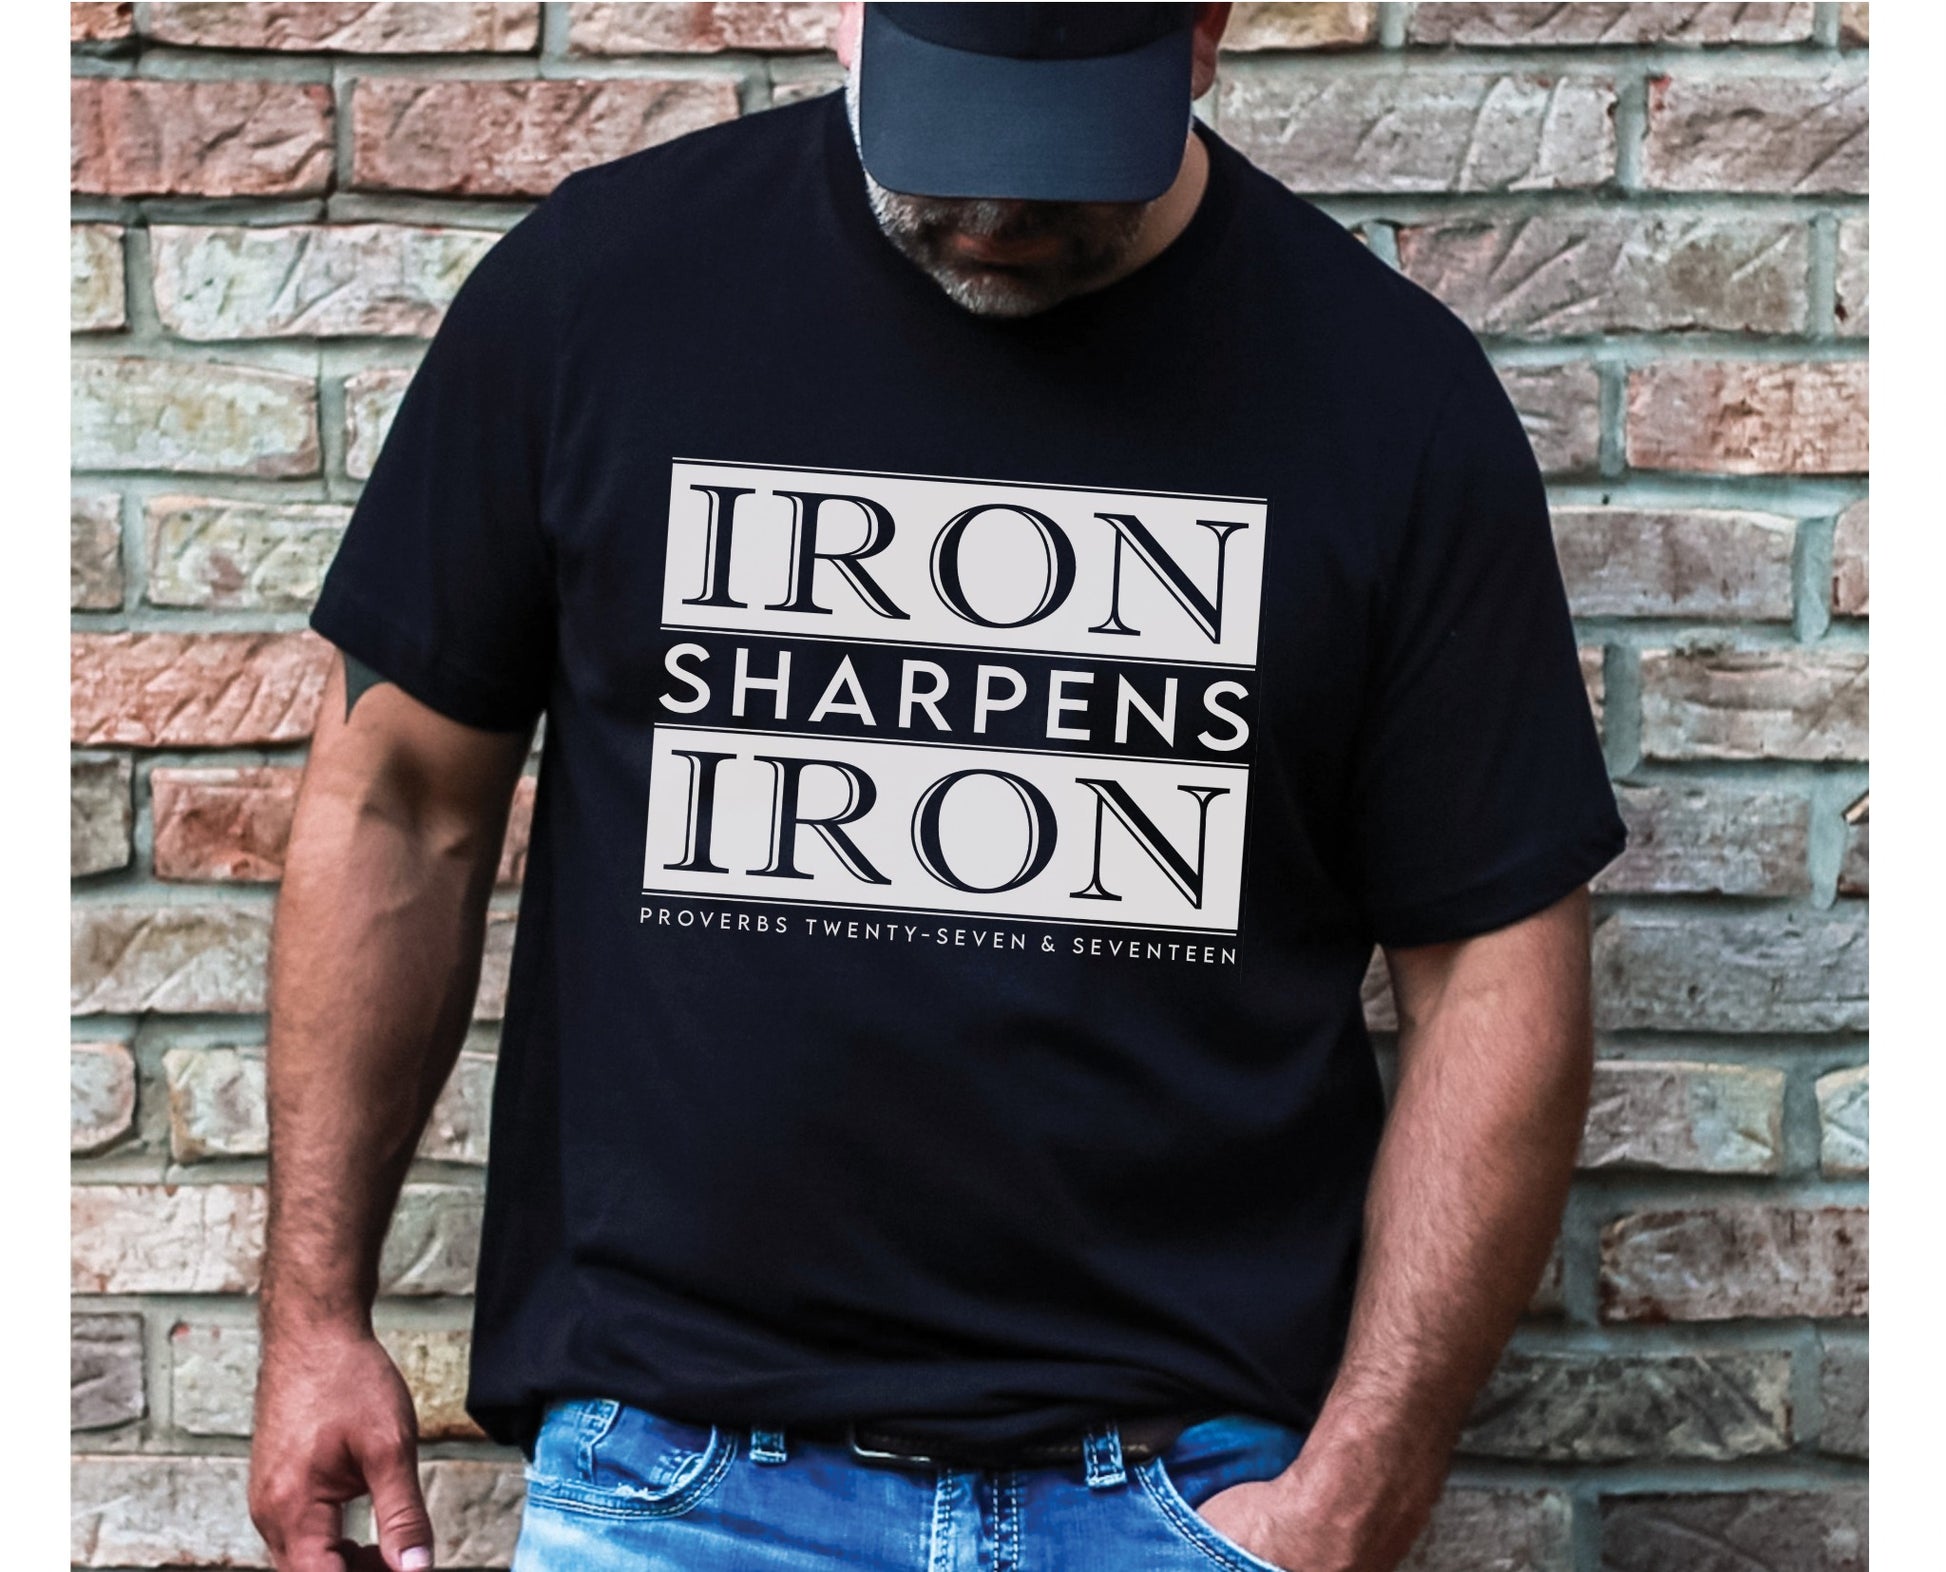 Iron Sharpens Iron Proverbs 27:17 Christian aesthetic block style design printed in white on soft black unisex t-shirt for men's groups